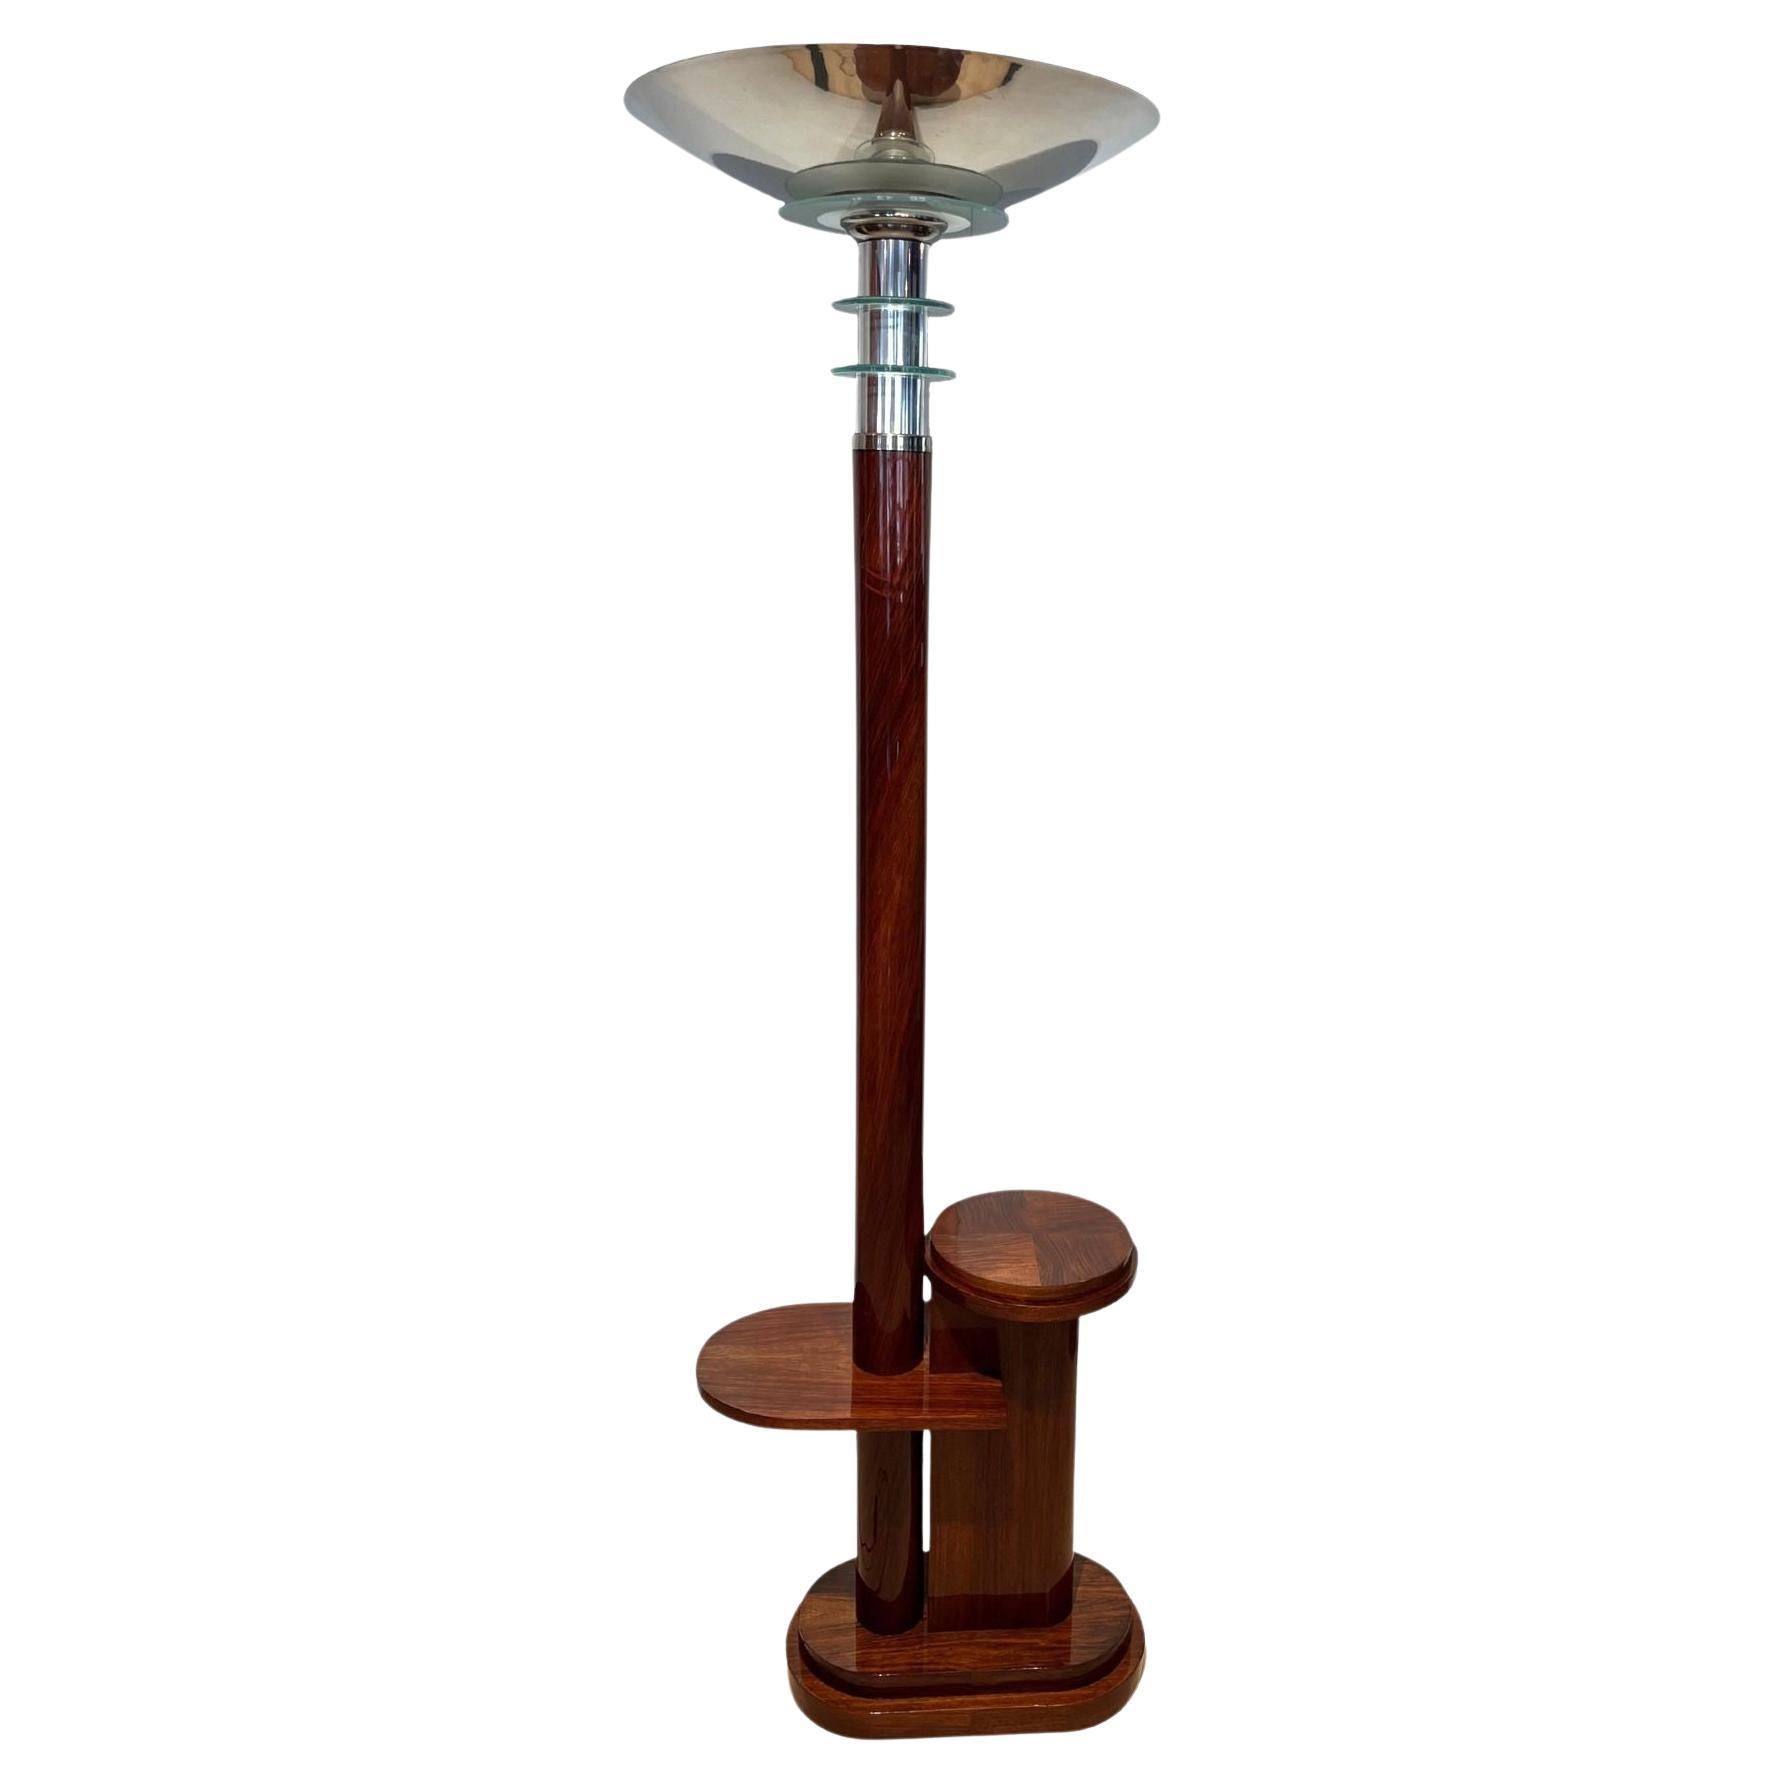 Art Deco Floor Lamp with Side Table, Walnut and Chrome, France, circa 1930 For Sale